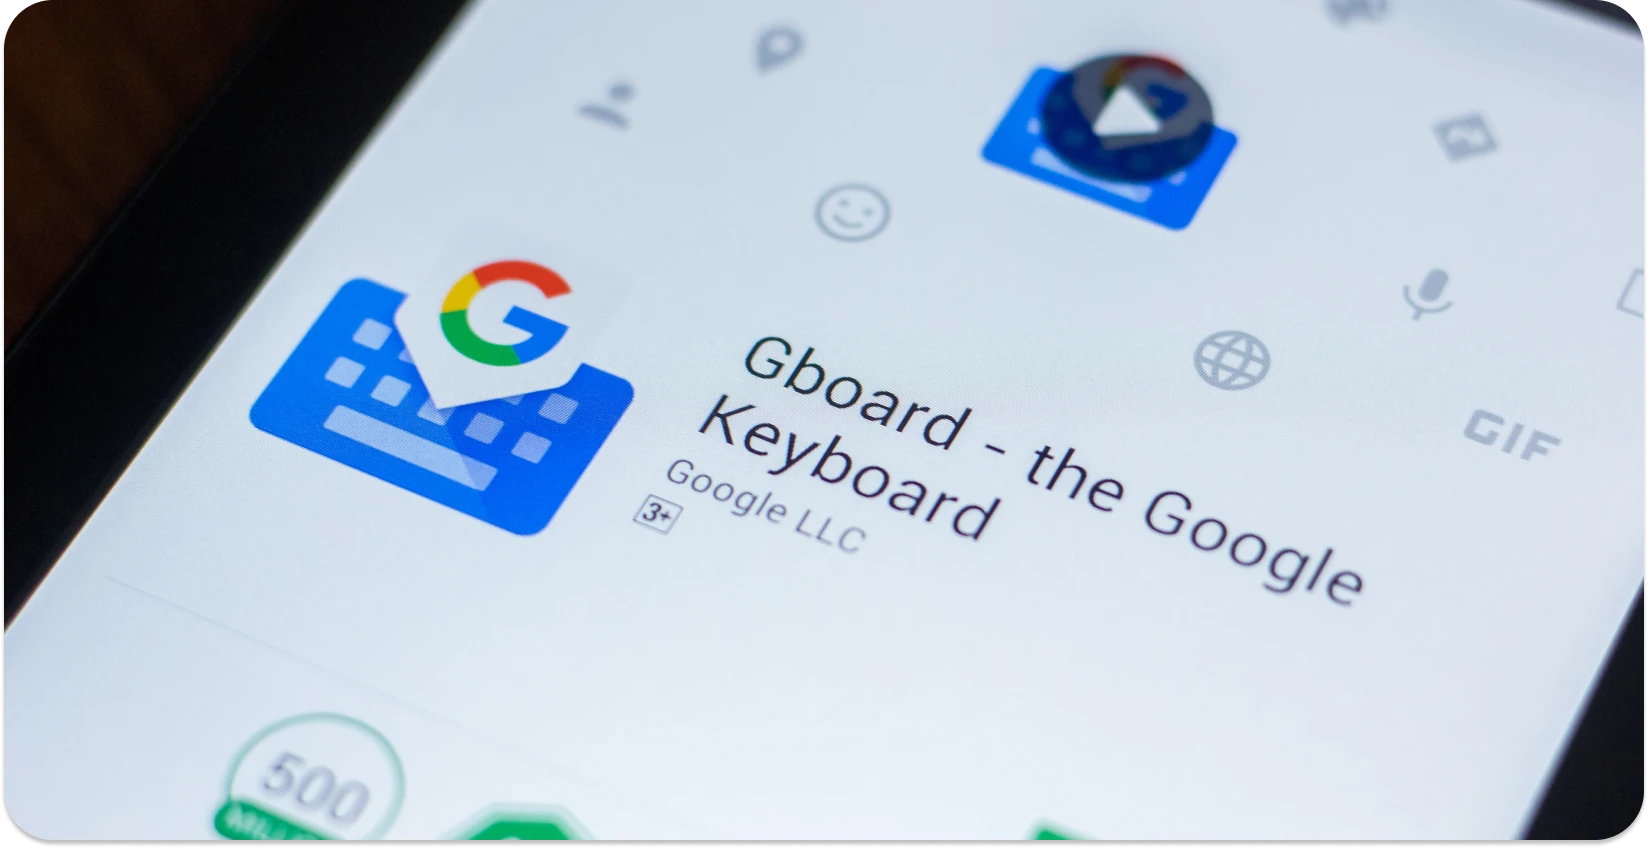 Close-up of Gboard app on a smartphone screen, a popular dictation tool by Google.